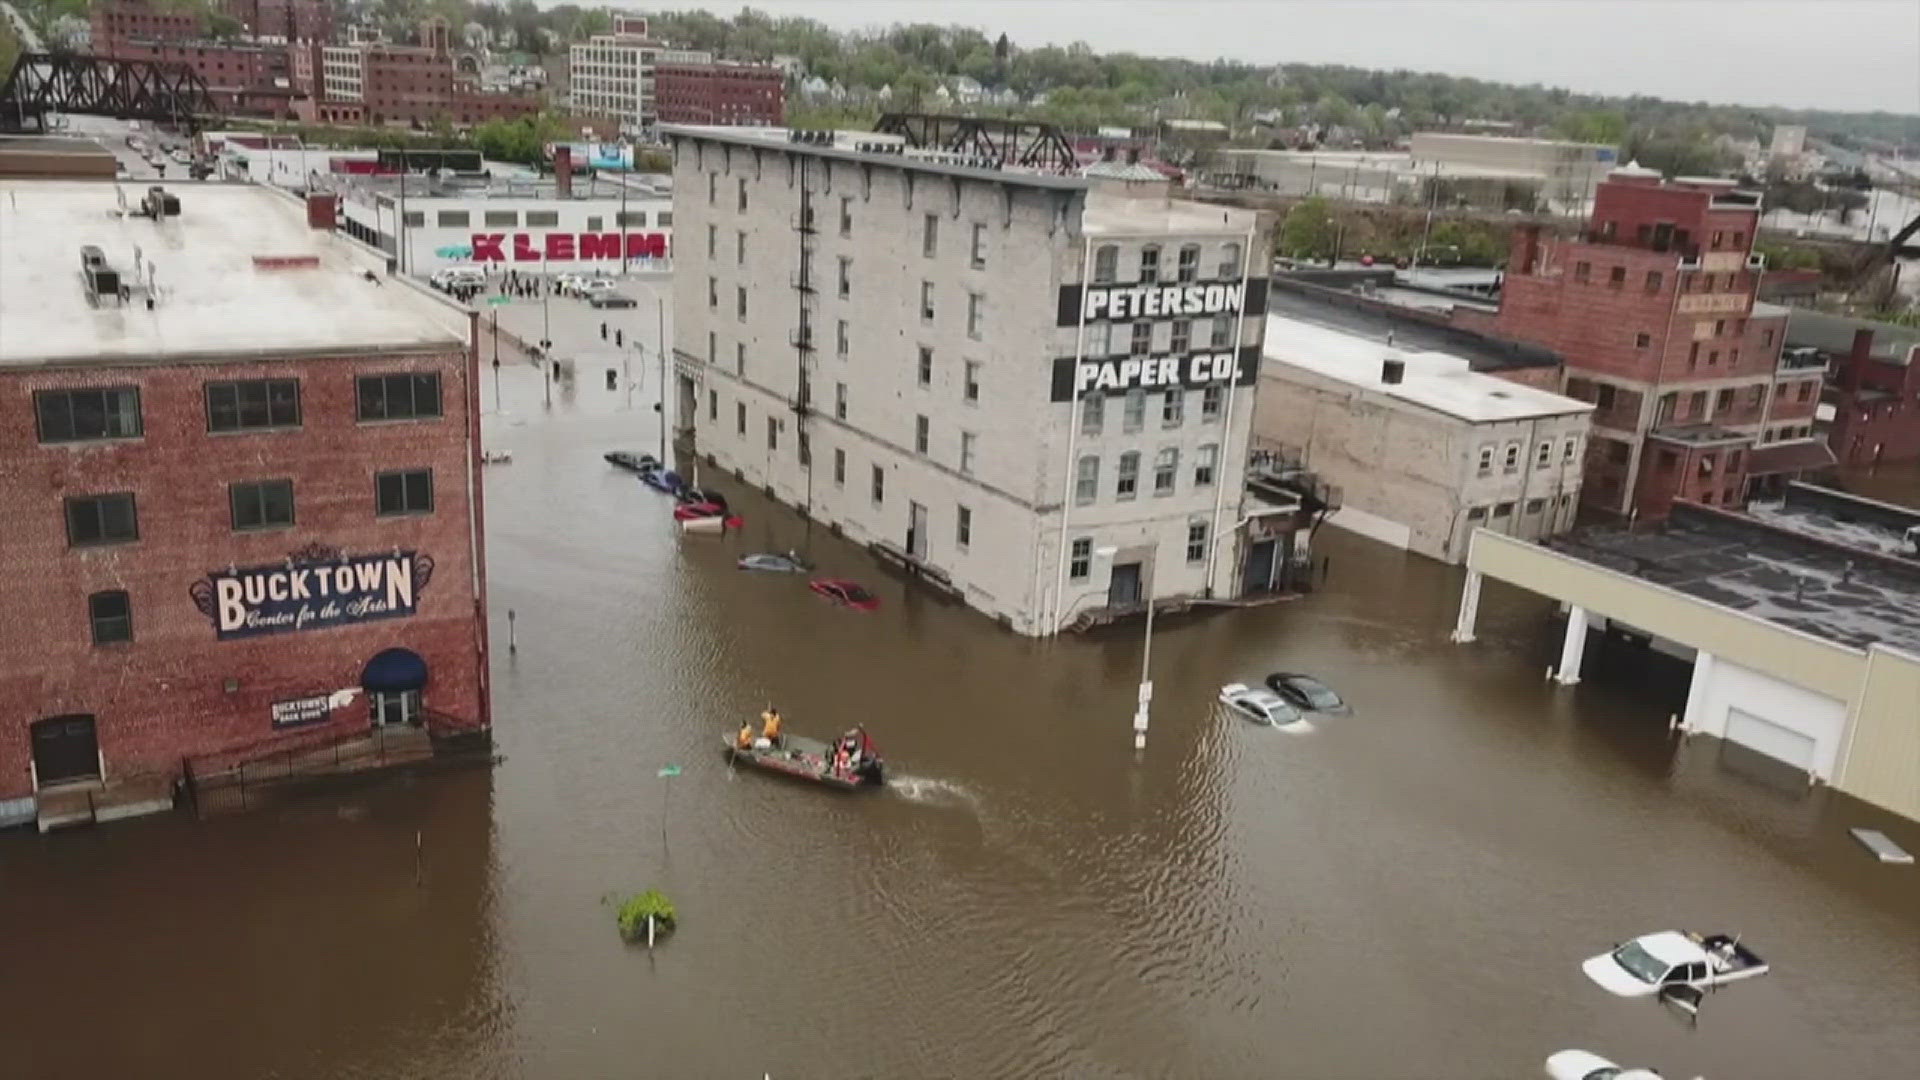 The lawsuit comes shortly after the 5-year anniversary of the flooding that overtook downtown Davenport.